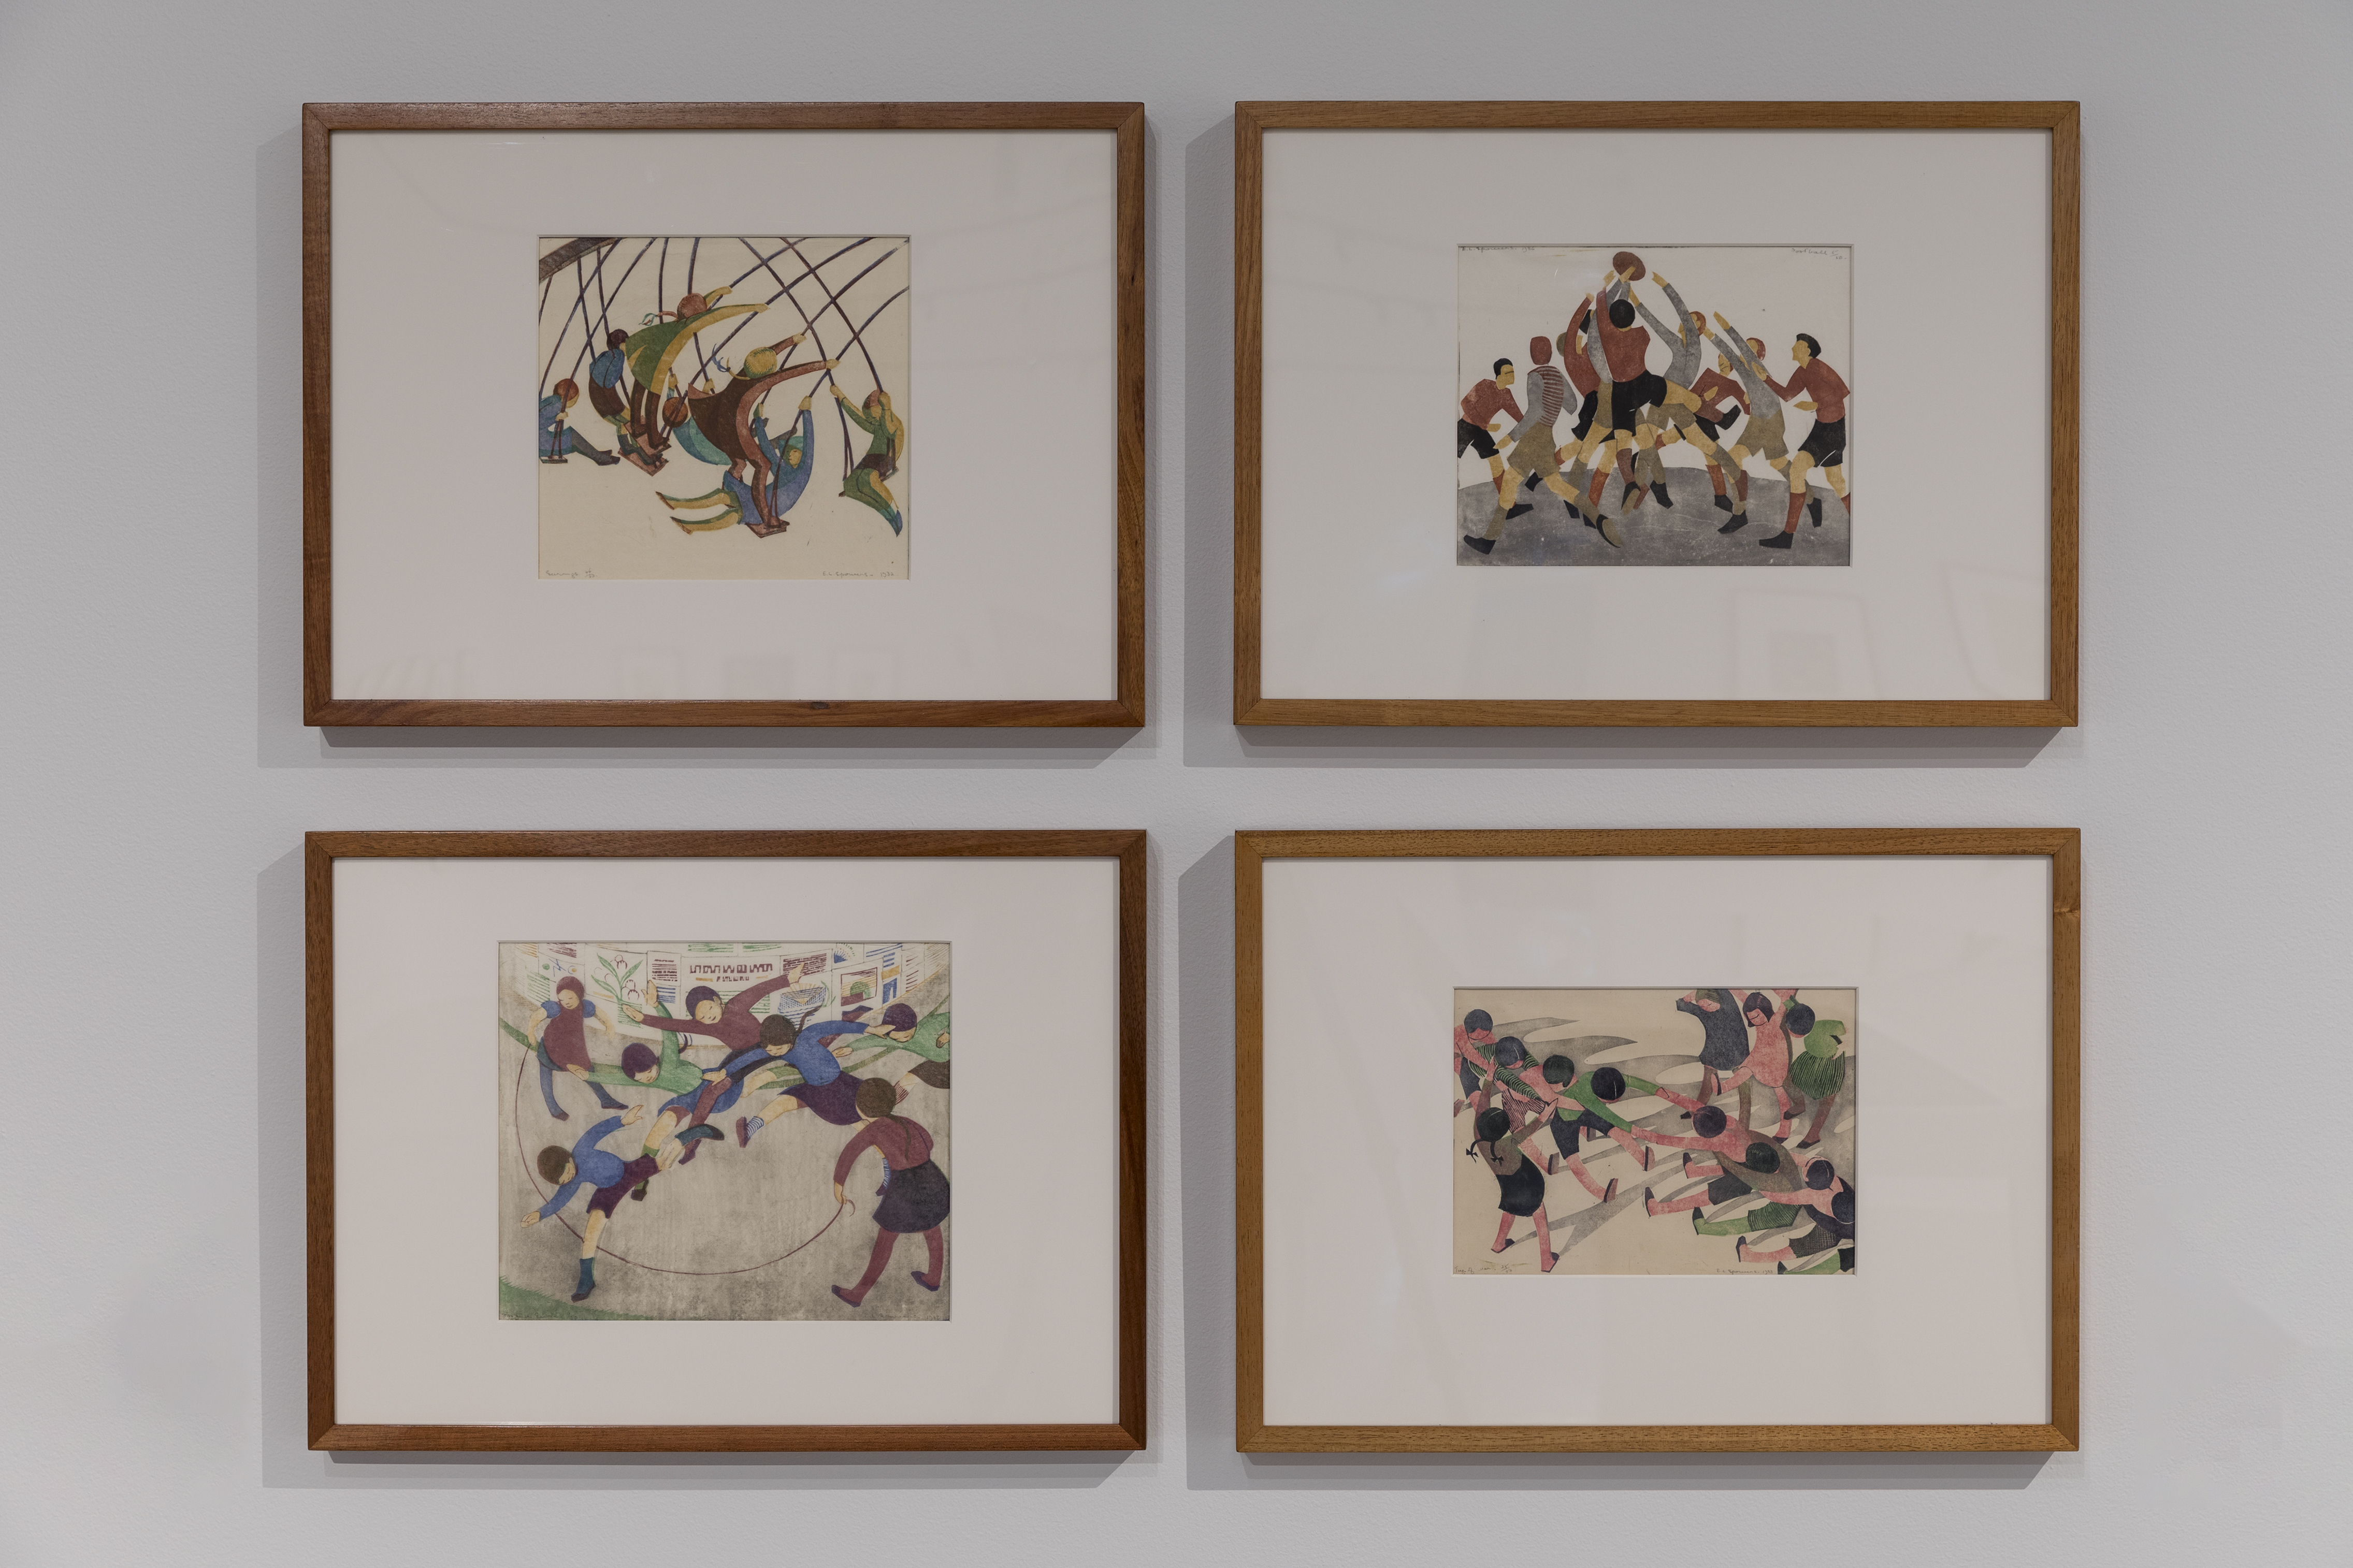 Ethel Spowers linocuts in <em>Spowers &amp; Syme</em>, installation view. Courtesy of Geelong Art Gallery. Photographer: Andrew Curtis